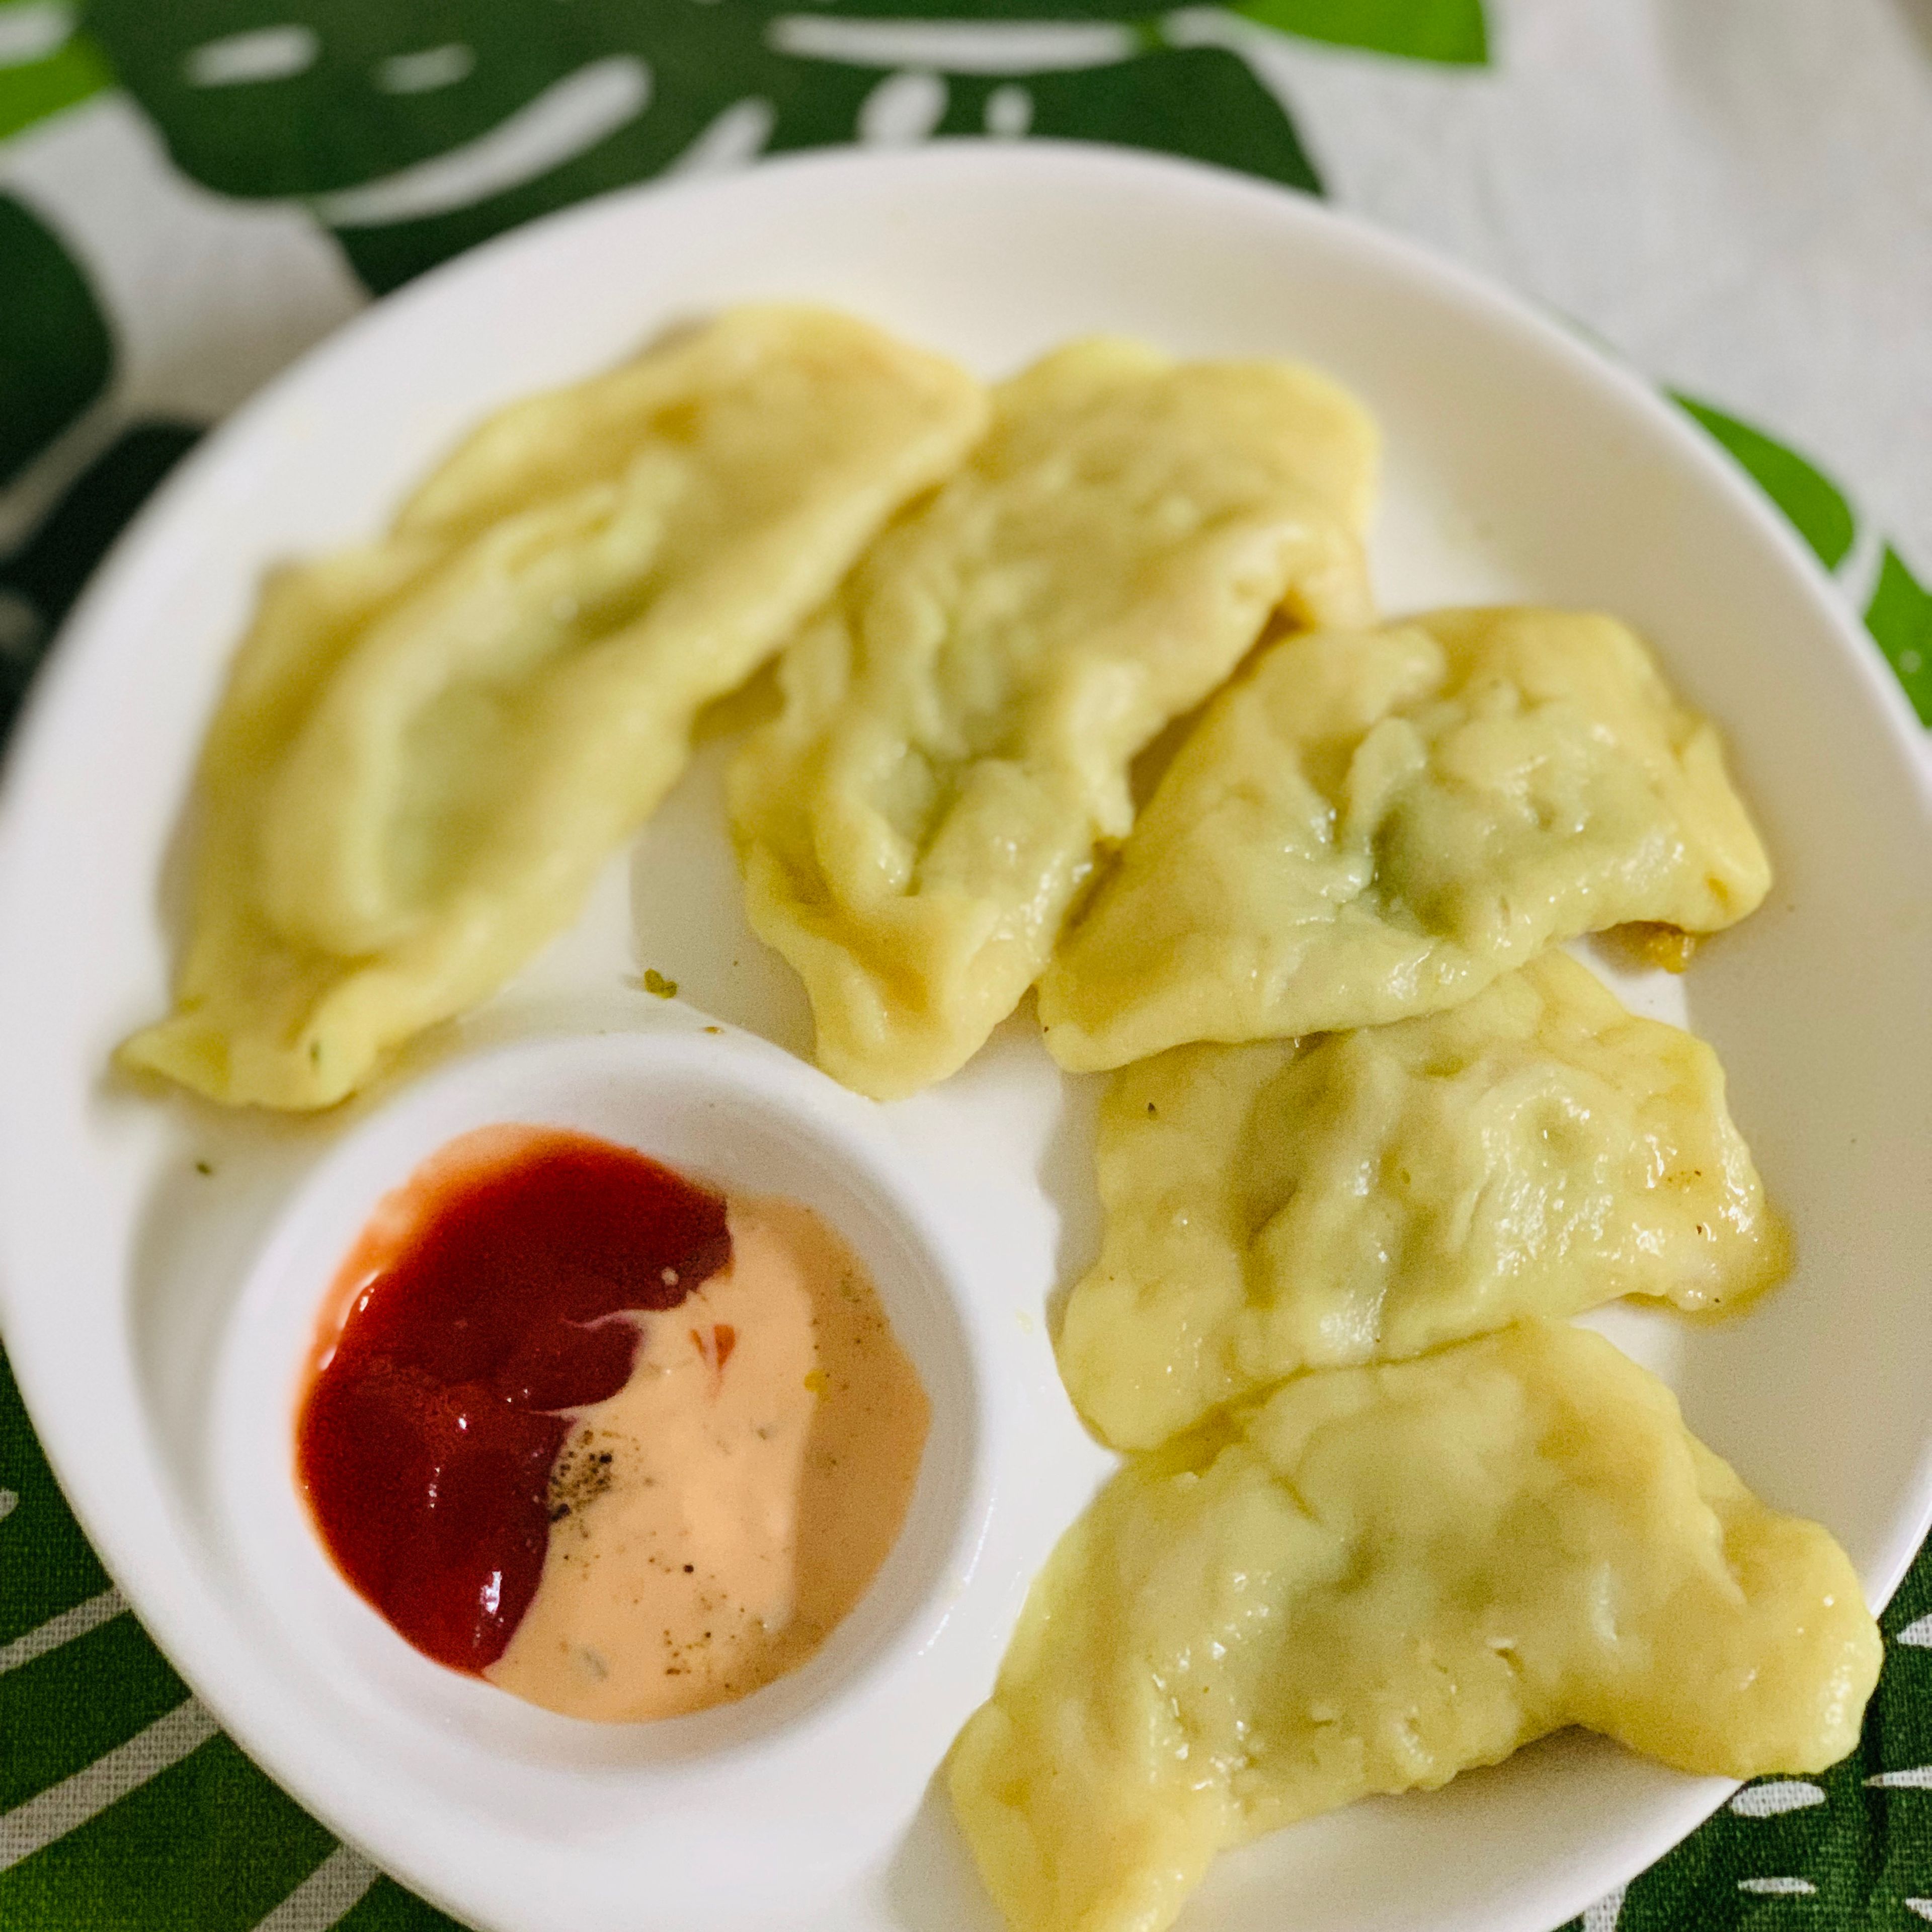 Put the ready dumplings in the plate and enjoy. 